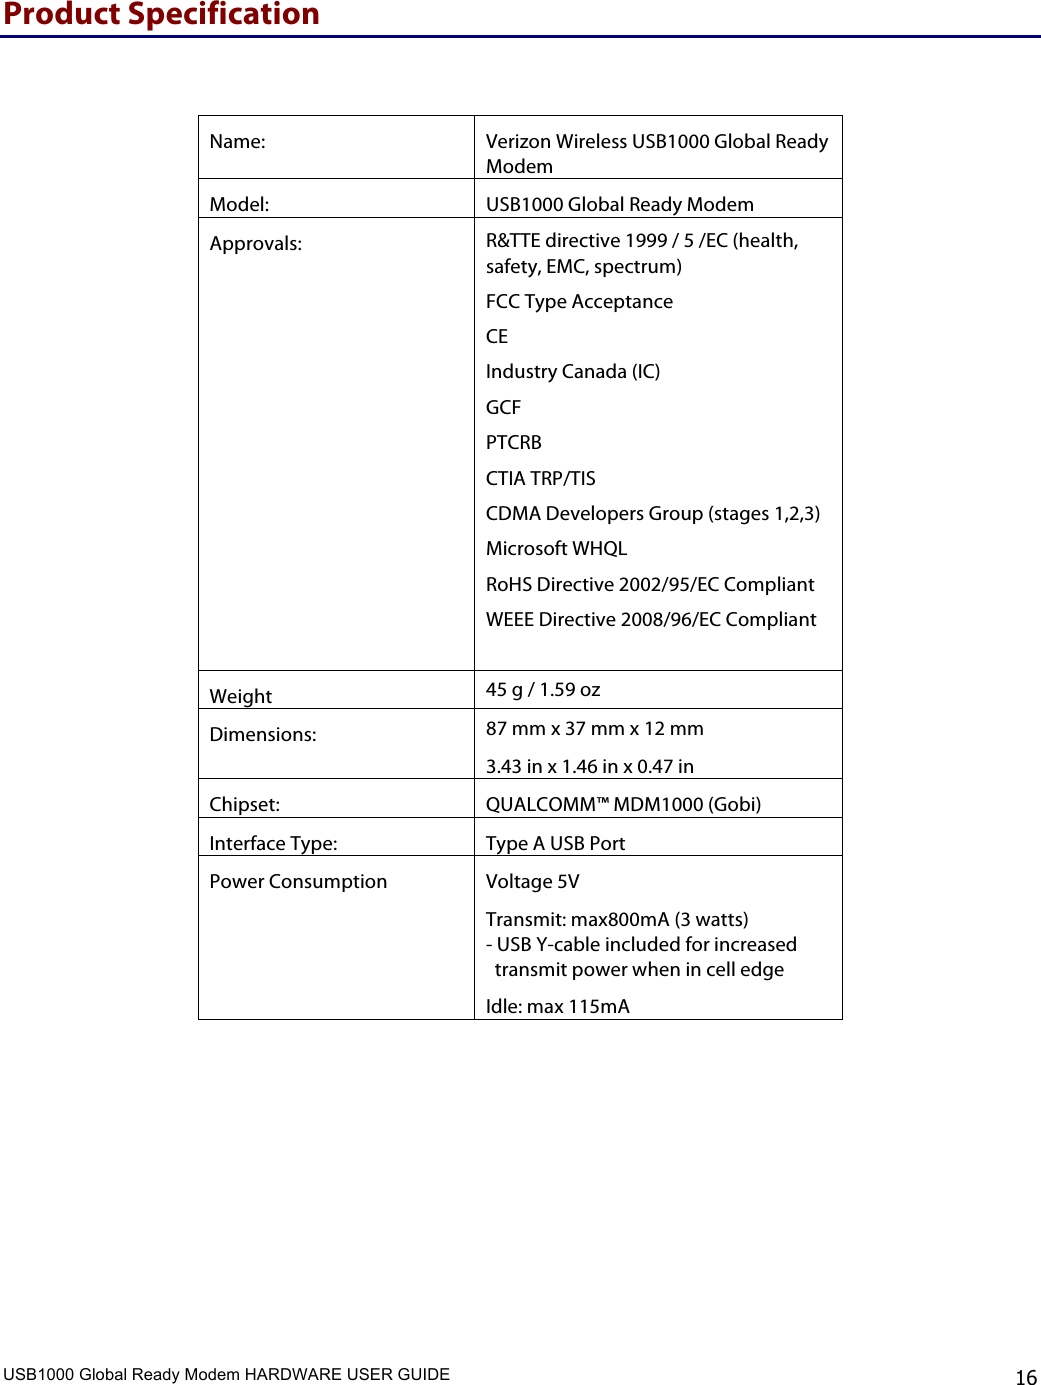 USB1000 Global Ready Modem HARDWARE USER GUIDE    16 Product Specification  Name: Verizon Wireless USB1000 Global Ready Modem Model: USB1000 Global Ready Modem Approvals: R&amp;TTE directive 1999 / 5 /EC (health, safety, EMC, spectrum) FCC Type Acceptance CE Industry Canada (IC) GCF PTCRB CTIA TRP/TIS CDMA Developers Group (stages 1,2,3)  Microsoft WHQL RoHS Directive 2002/95/EC Compliant WEEE Directive 2008/96/EC Compliant  Weight 45 g / 1.59 oz Dimensions: 87 mm x 37 mm x 12 mm 3.43 in x 1.46 in x 0.47 in Chipset: QUALCOMM™ MDM1000 (Gobi) Interface Type: Type A USB Port Power Consumption Voltage 5V Transmit: max800mA (3 watts) - USB Y-cable included for increased    transmit power when in cell edge Idle: max 115mA 